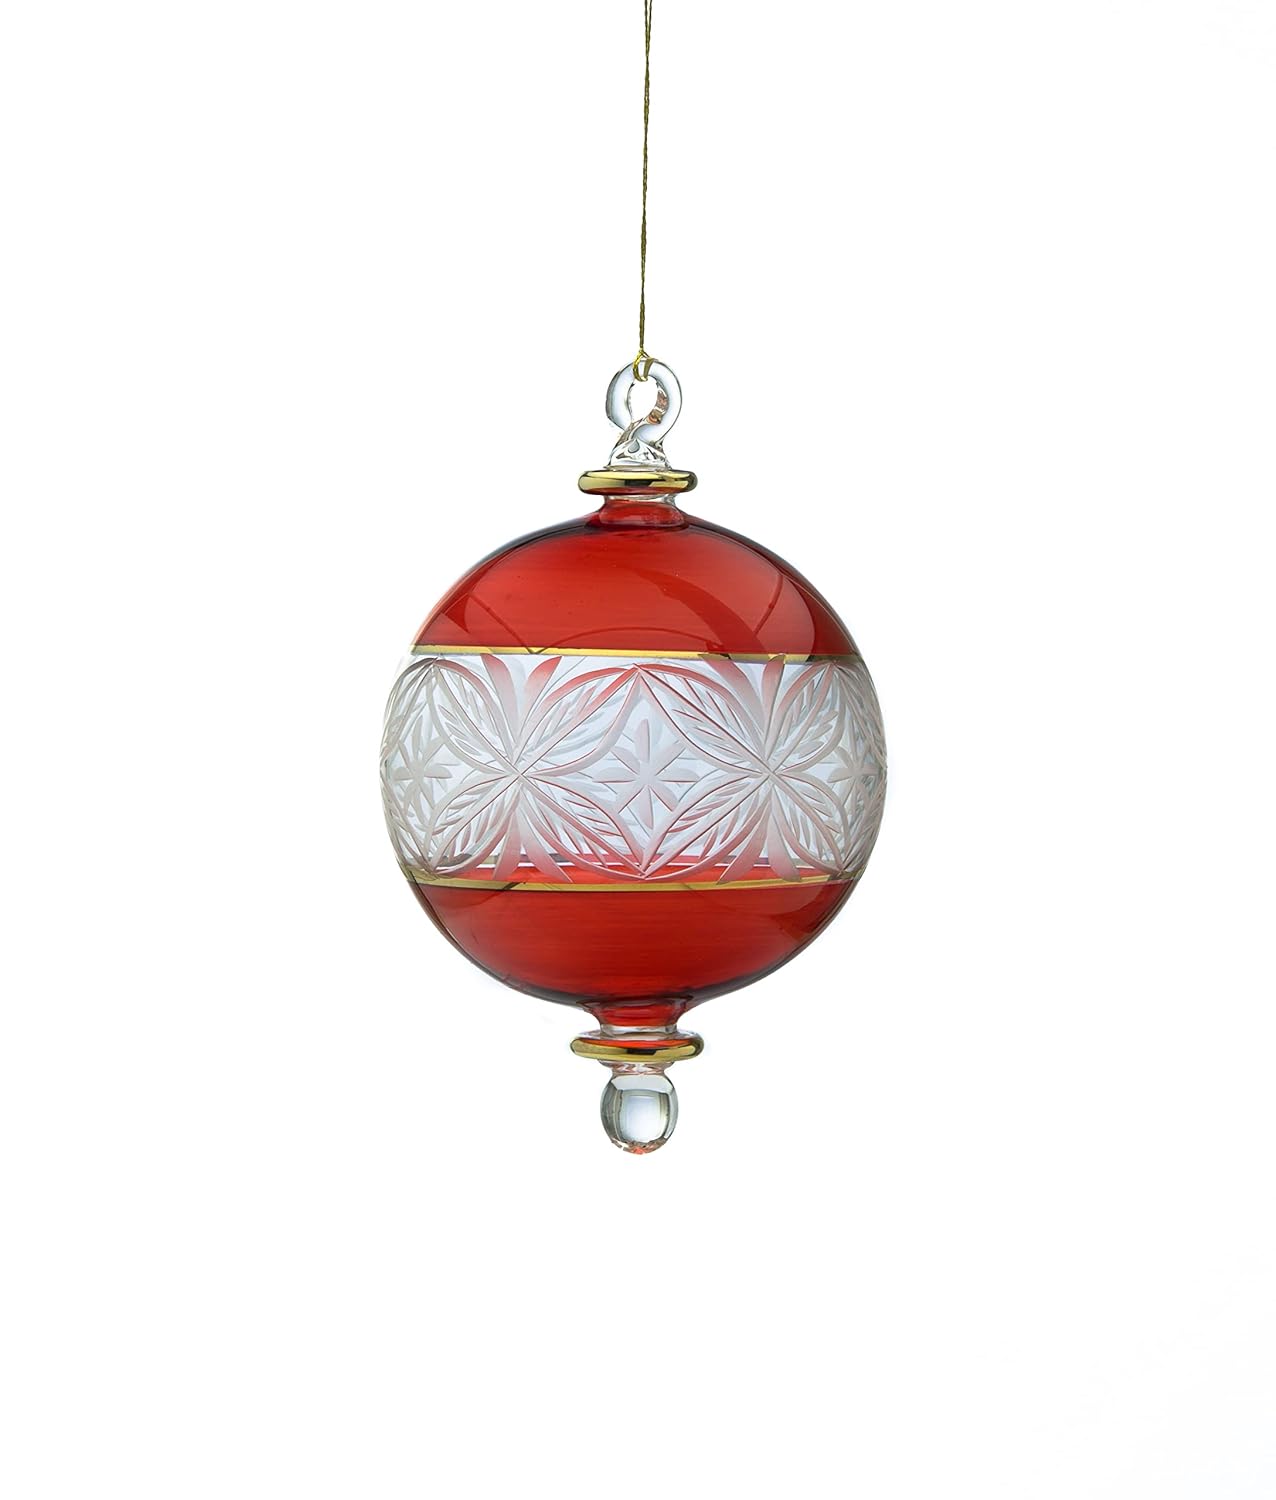 Red and Clear Engraved Glass Christmas Ornament for Christmas Tree Decorations - Les Trois Pyramides